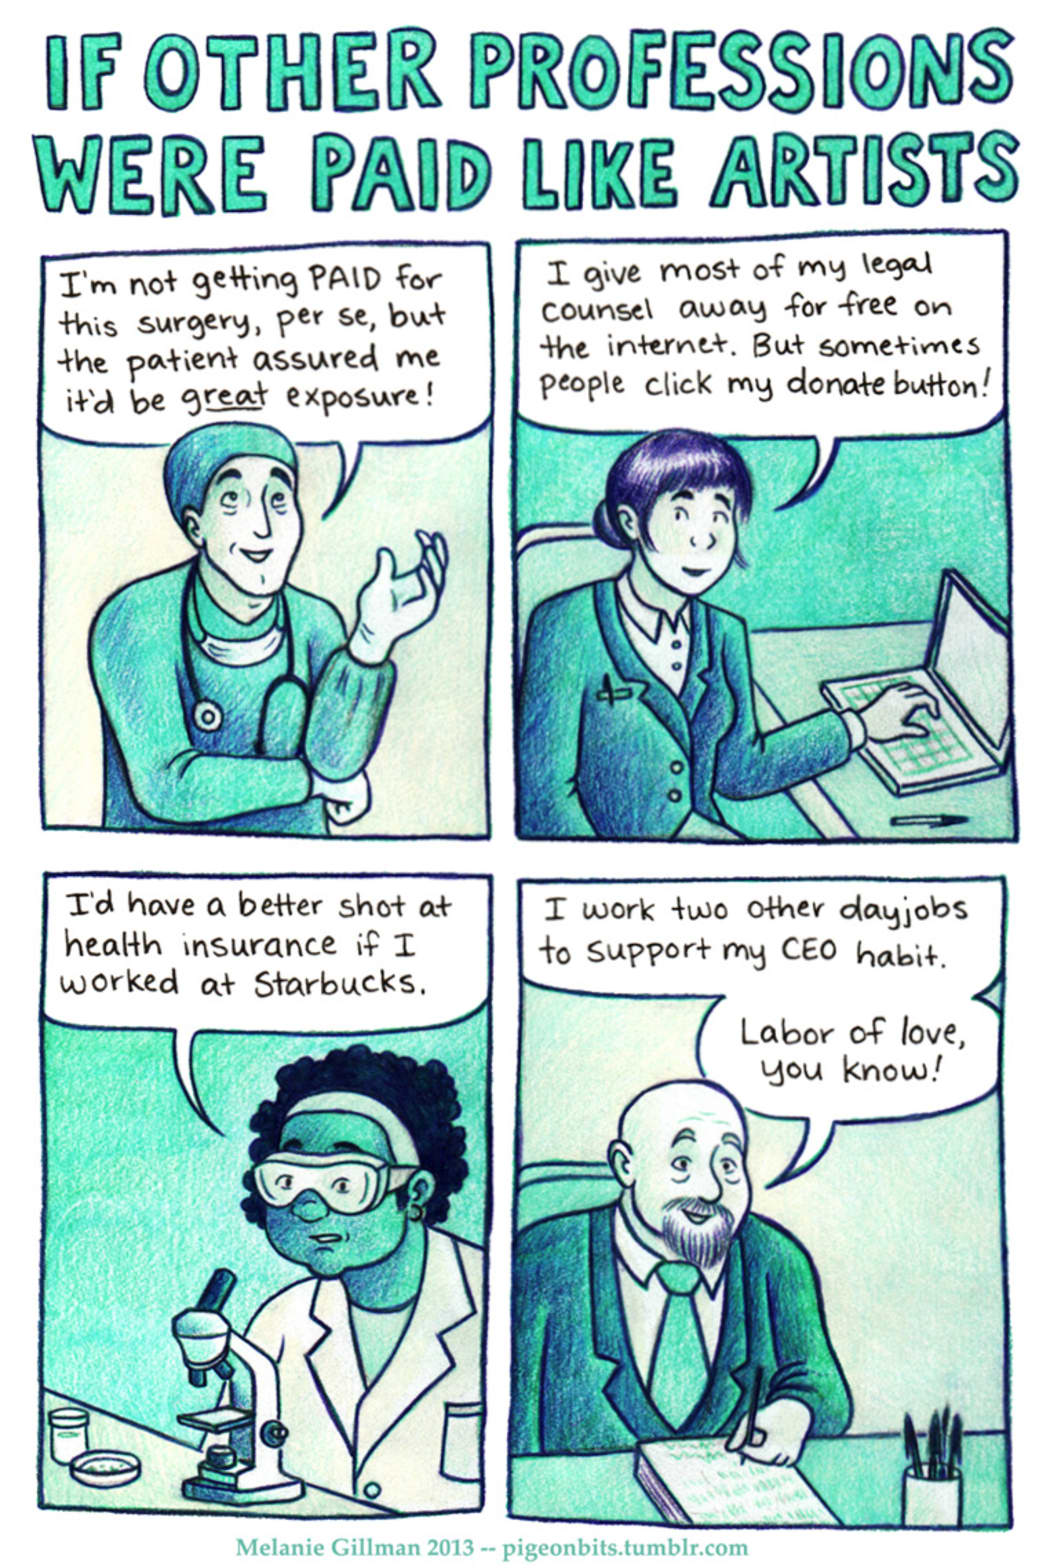 "If other professions were paid like artists", by Melanie Gillman